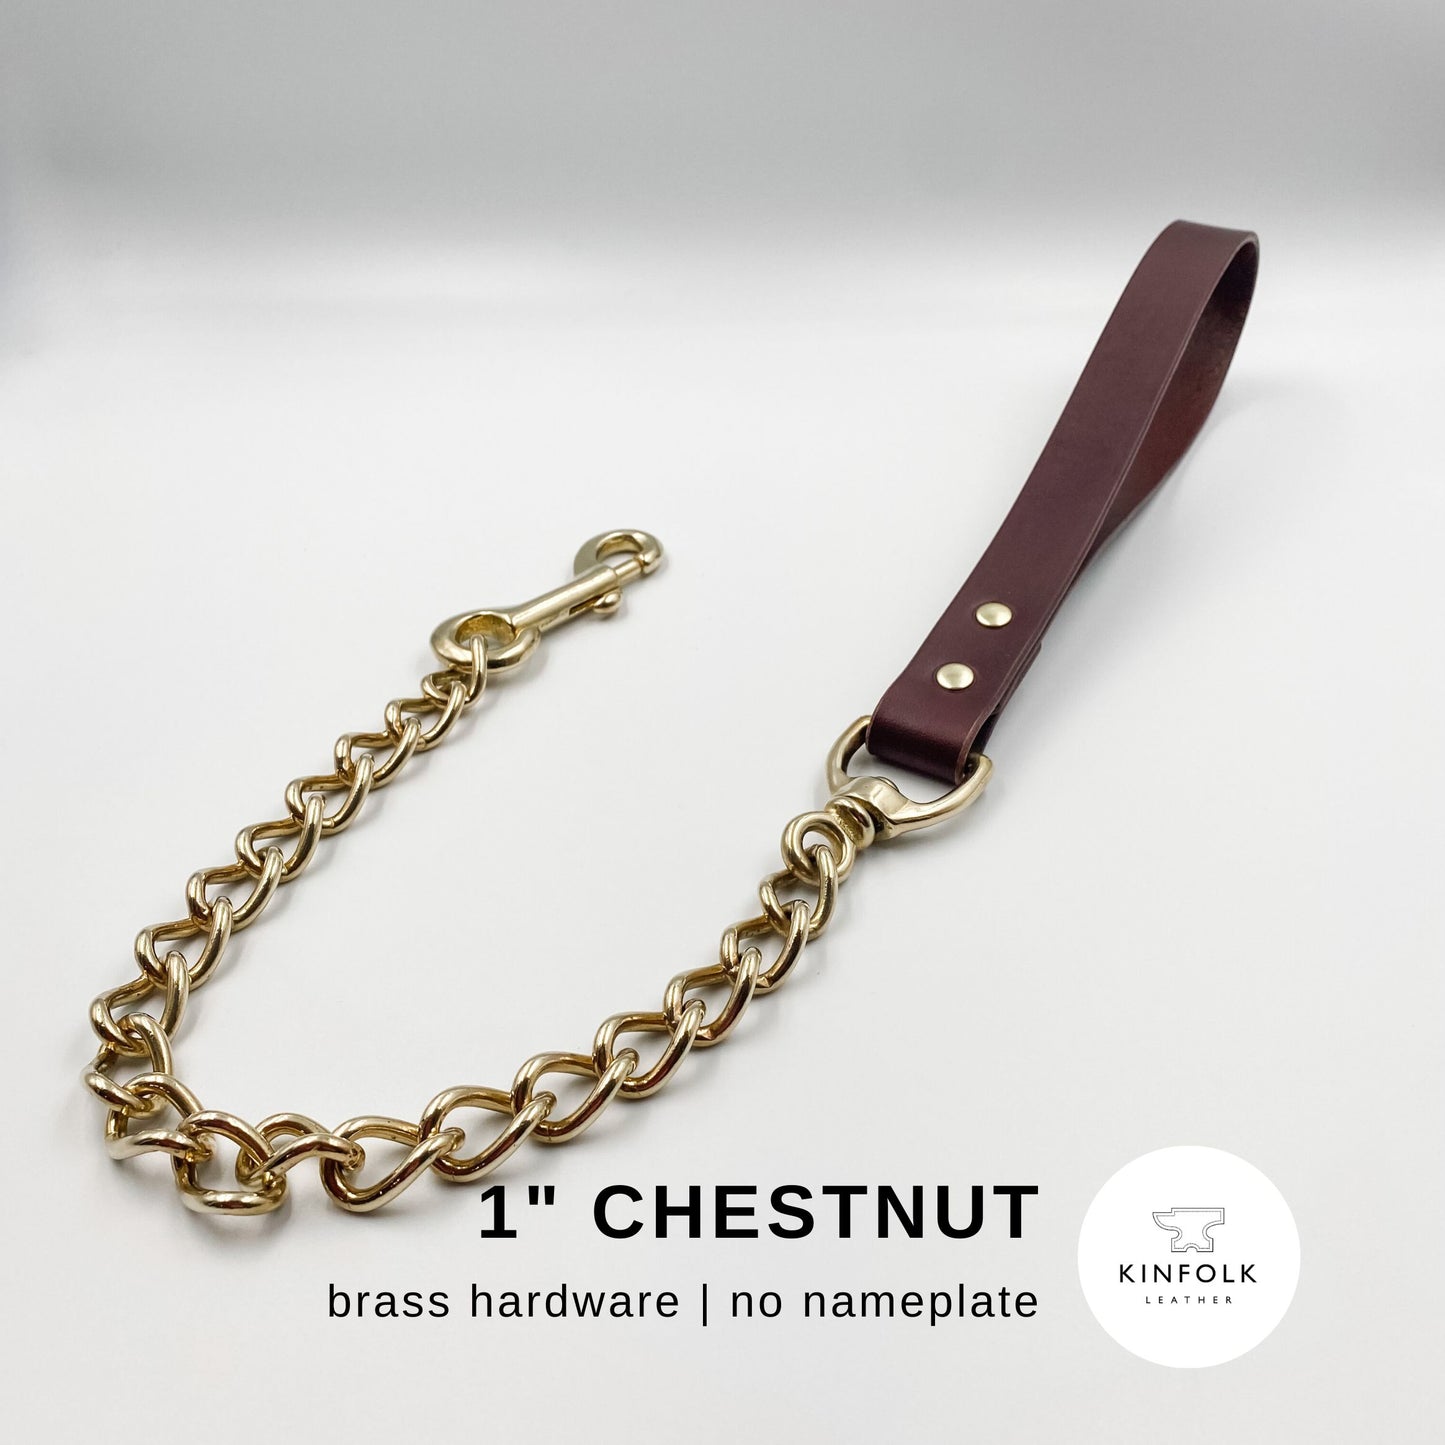 Genuine Leather - Chain Dog Lead with Leather Handle